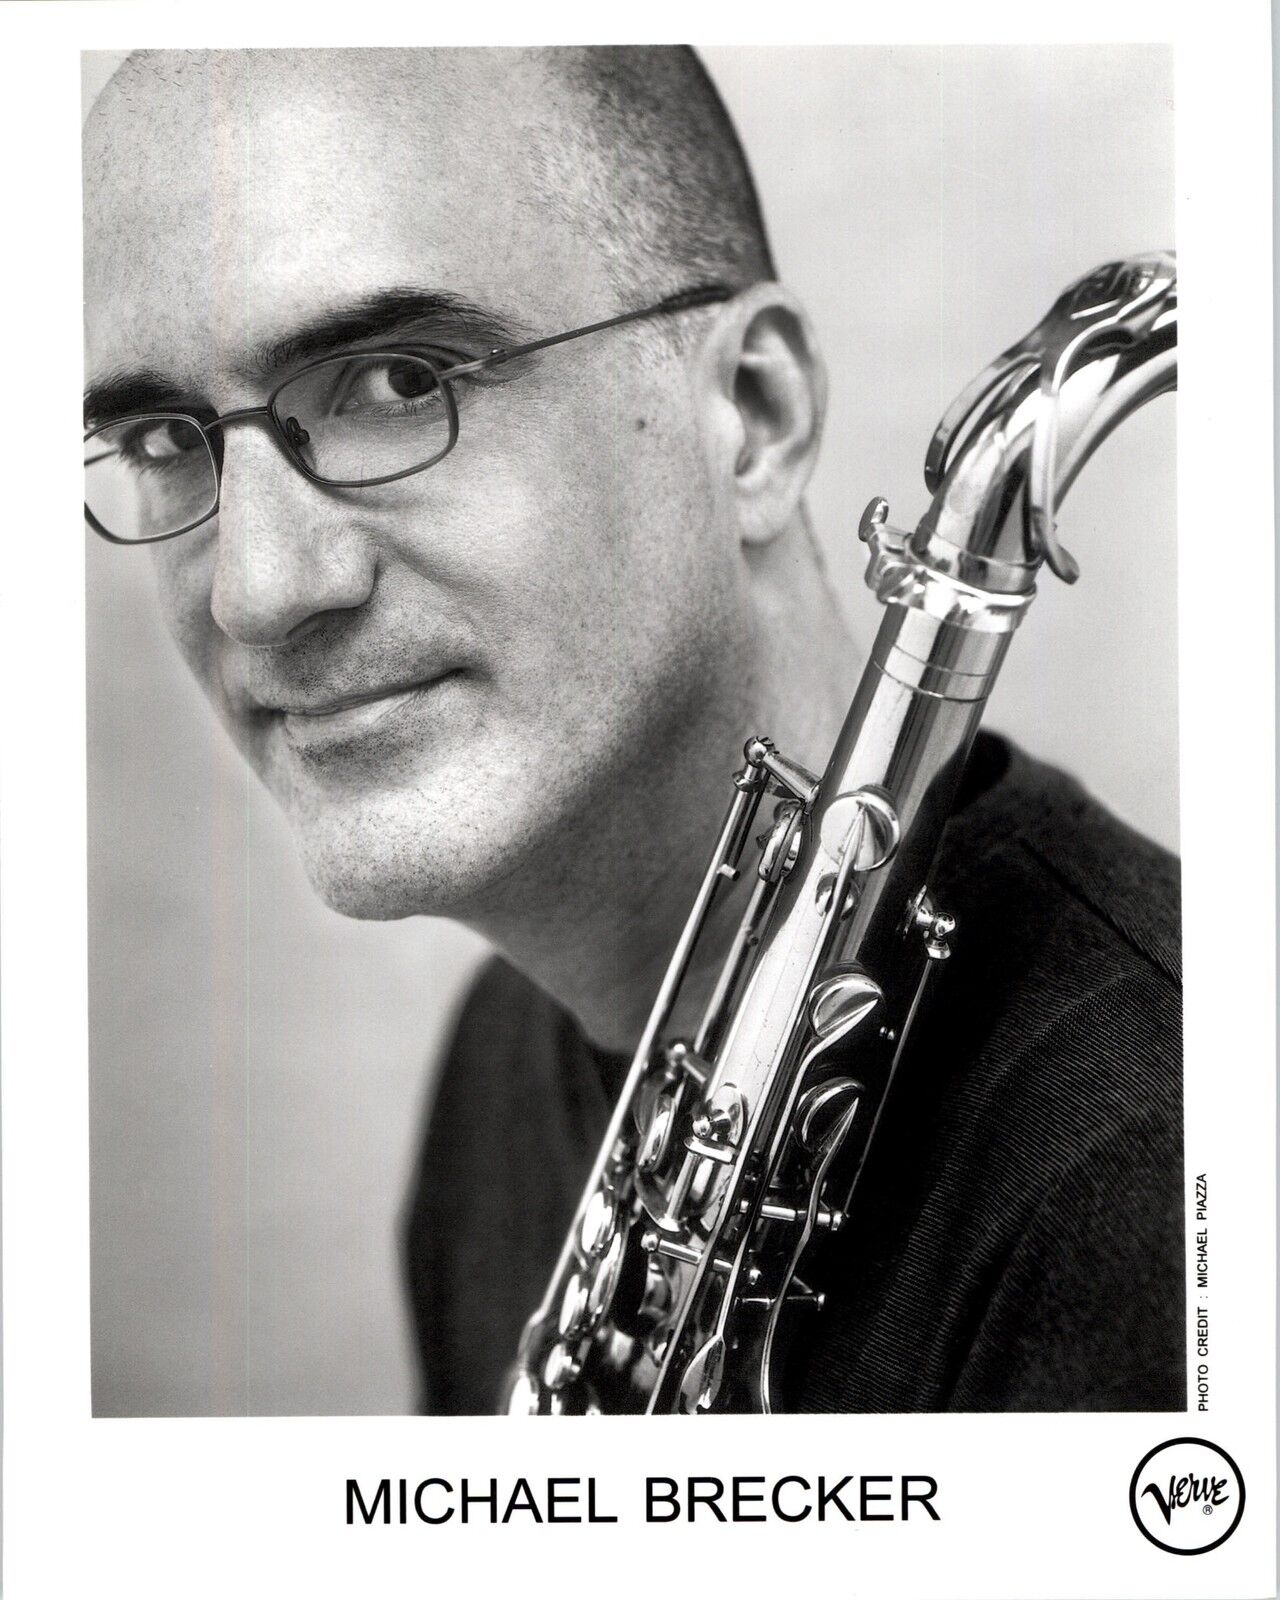 RARE Reprint Press Photo of Michael Brecker a Jazz Composer and Saxophonist